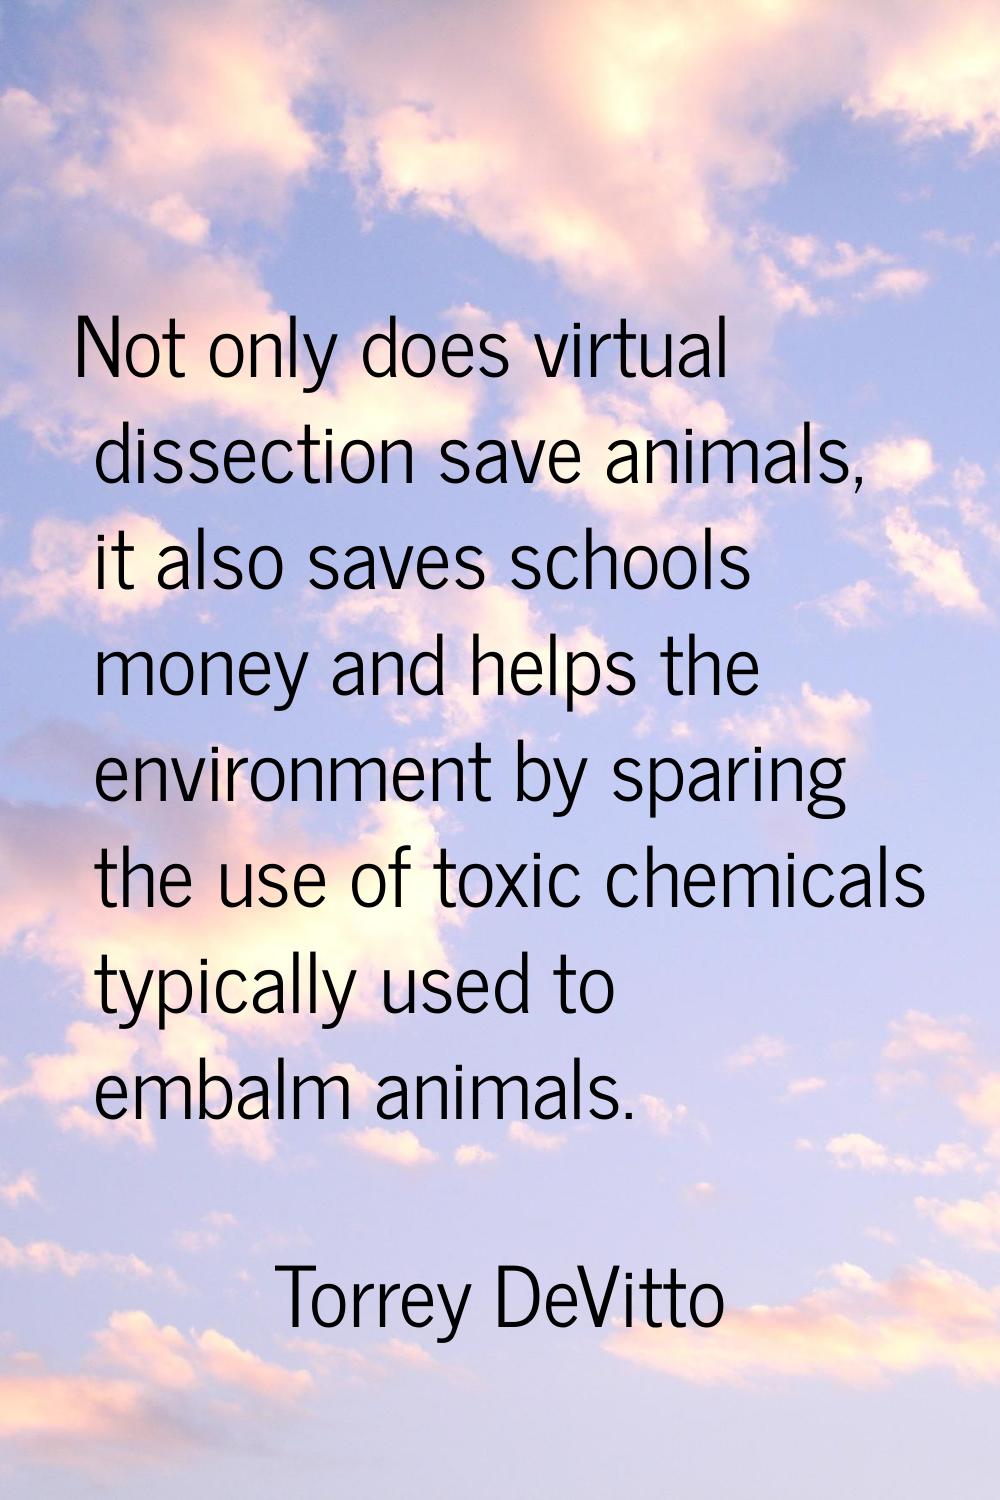 Not only does virtual dissection save animals, it also saves schools money and helps the environmen